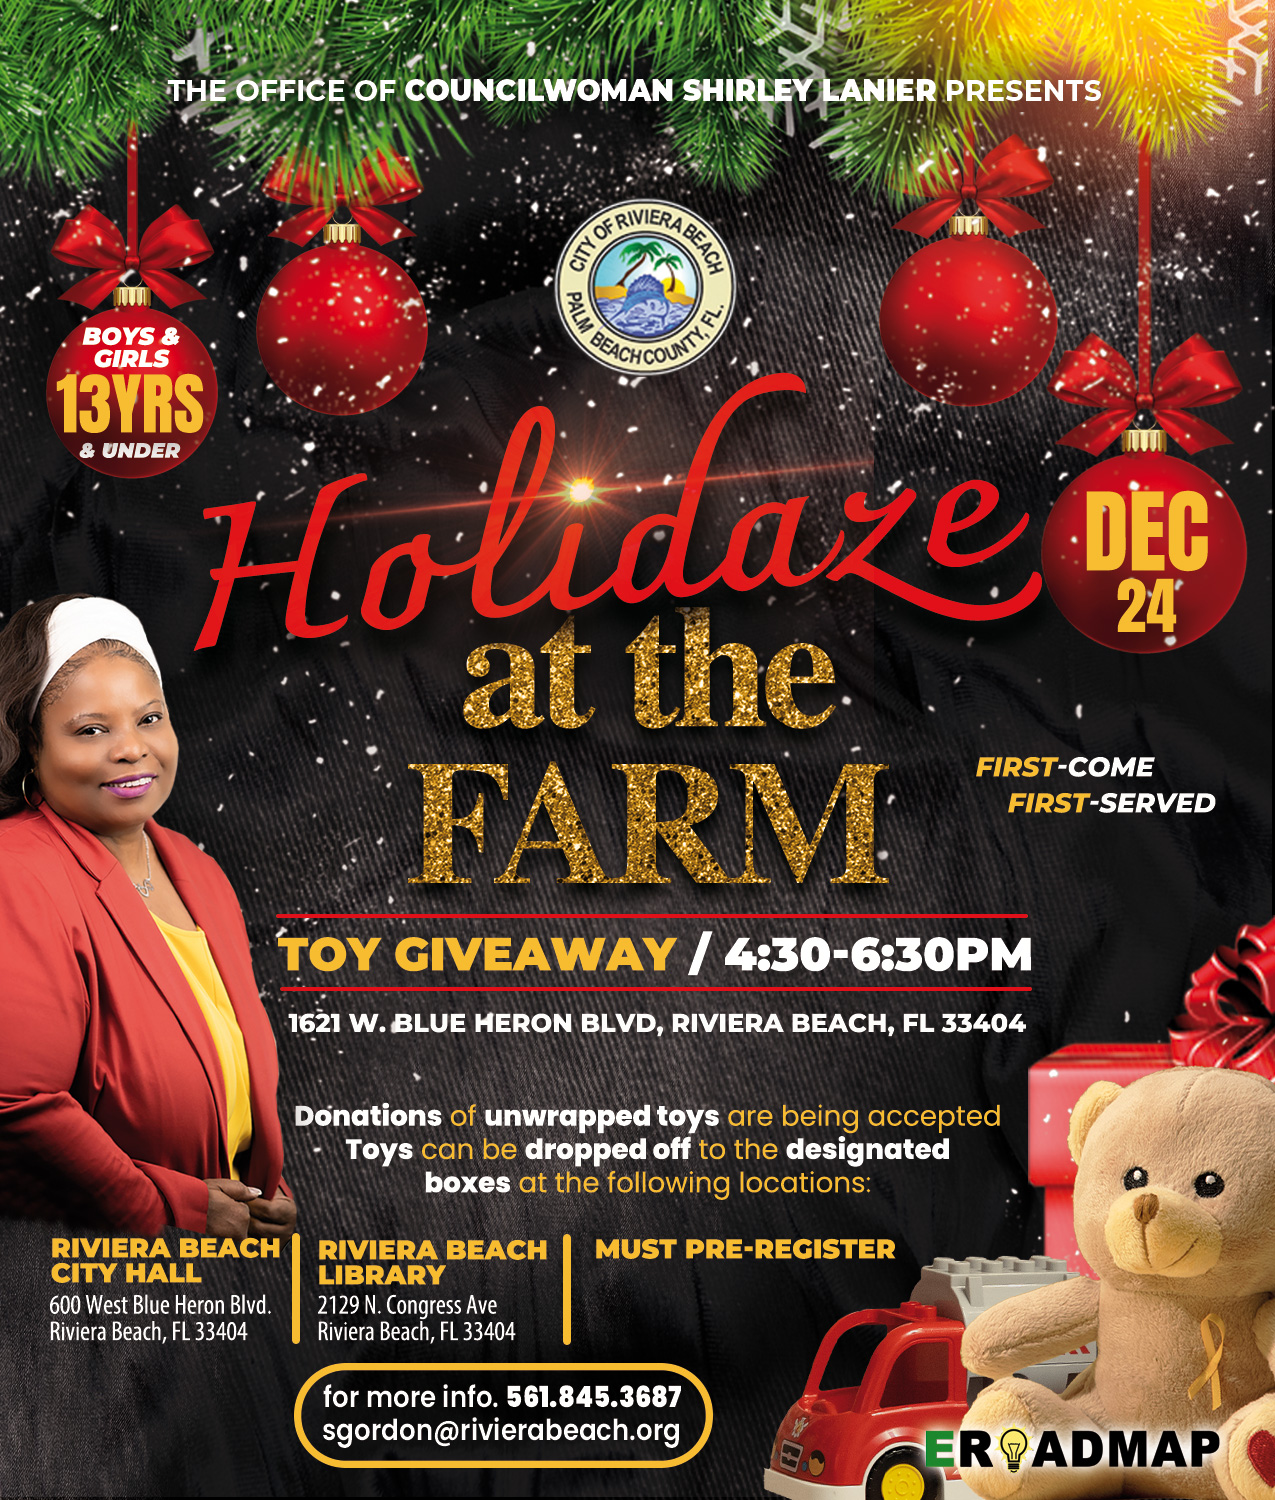 THE OFFICI 'AN SHIRLE ANIER PRESENTS § BOYS & GIRL 13YRS Holidare at the FARM TOY GIVEAWAY / 4:30-6:30PM 1621 W. BLUE HERON BLVD, RIVIERA BEACH, FL 33404 DEC 24 FIRST-COME FIRST-SERVED Donations of unwrapped toys are being accepted Toys can be dropped off to the designated boxes at the following locations: RIVIERA BEACH RIVIERA BEACH CITY HALL LIBRARY 600 West Blue Heron Blvd. 2129 N. Congress Ave Riviera Beach, FL 33404 Riviera Beach, FL 33404 MUST PRE-REGISTER for more info. 561.845.3687 sgordon@rivierabeach.org